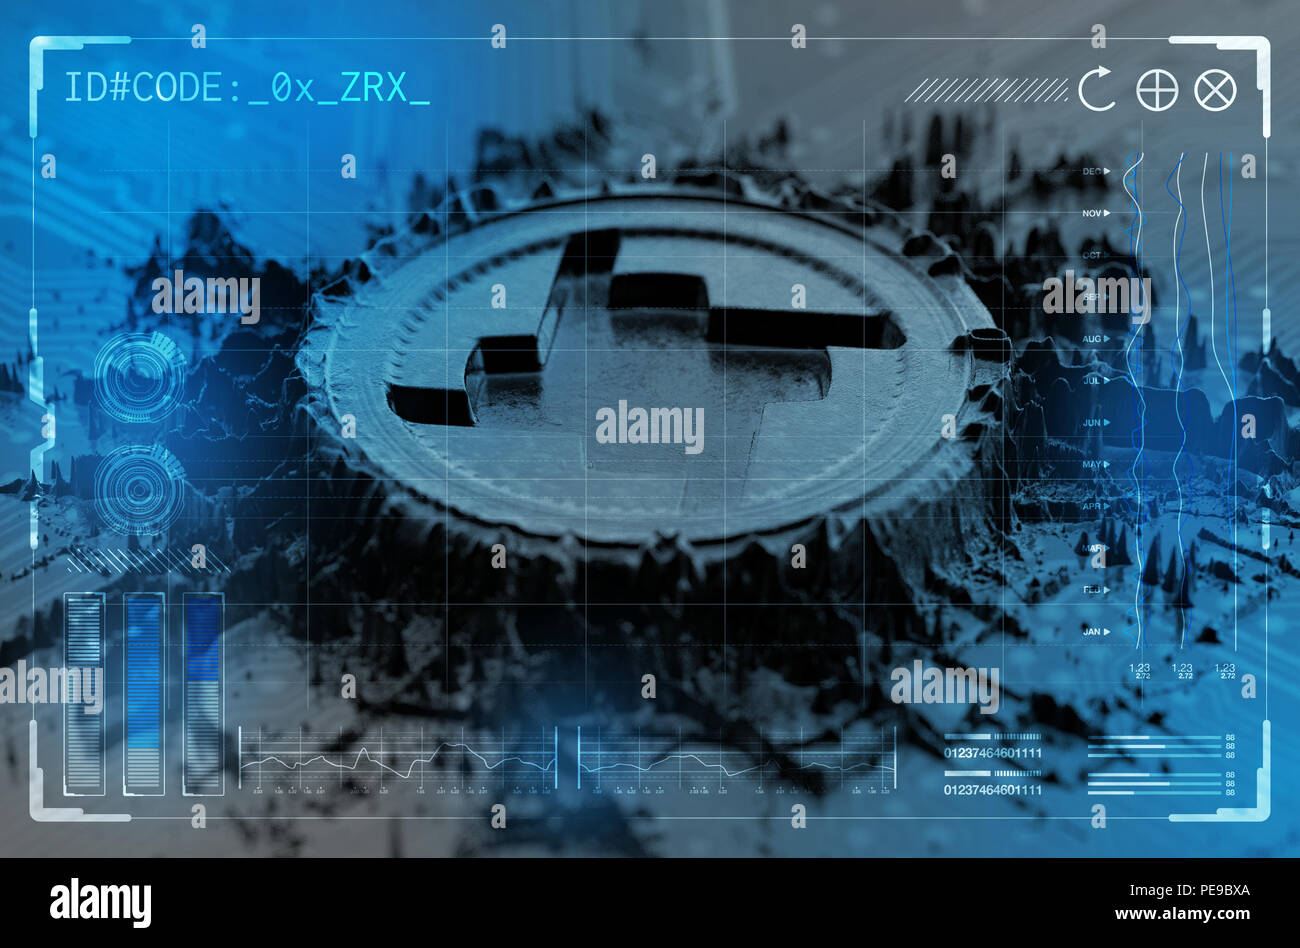 Extruded metal particles that build up to form a physical OX cryptocurrency symbol overlaid with a technical data analysis interface - 3D render Stock Photo